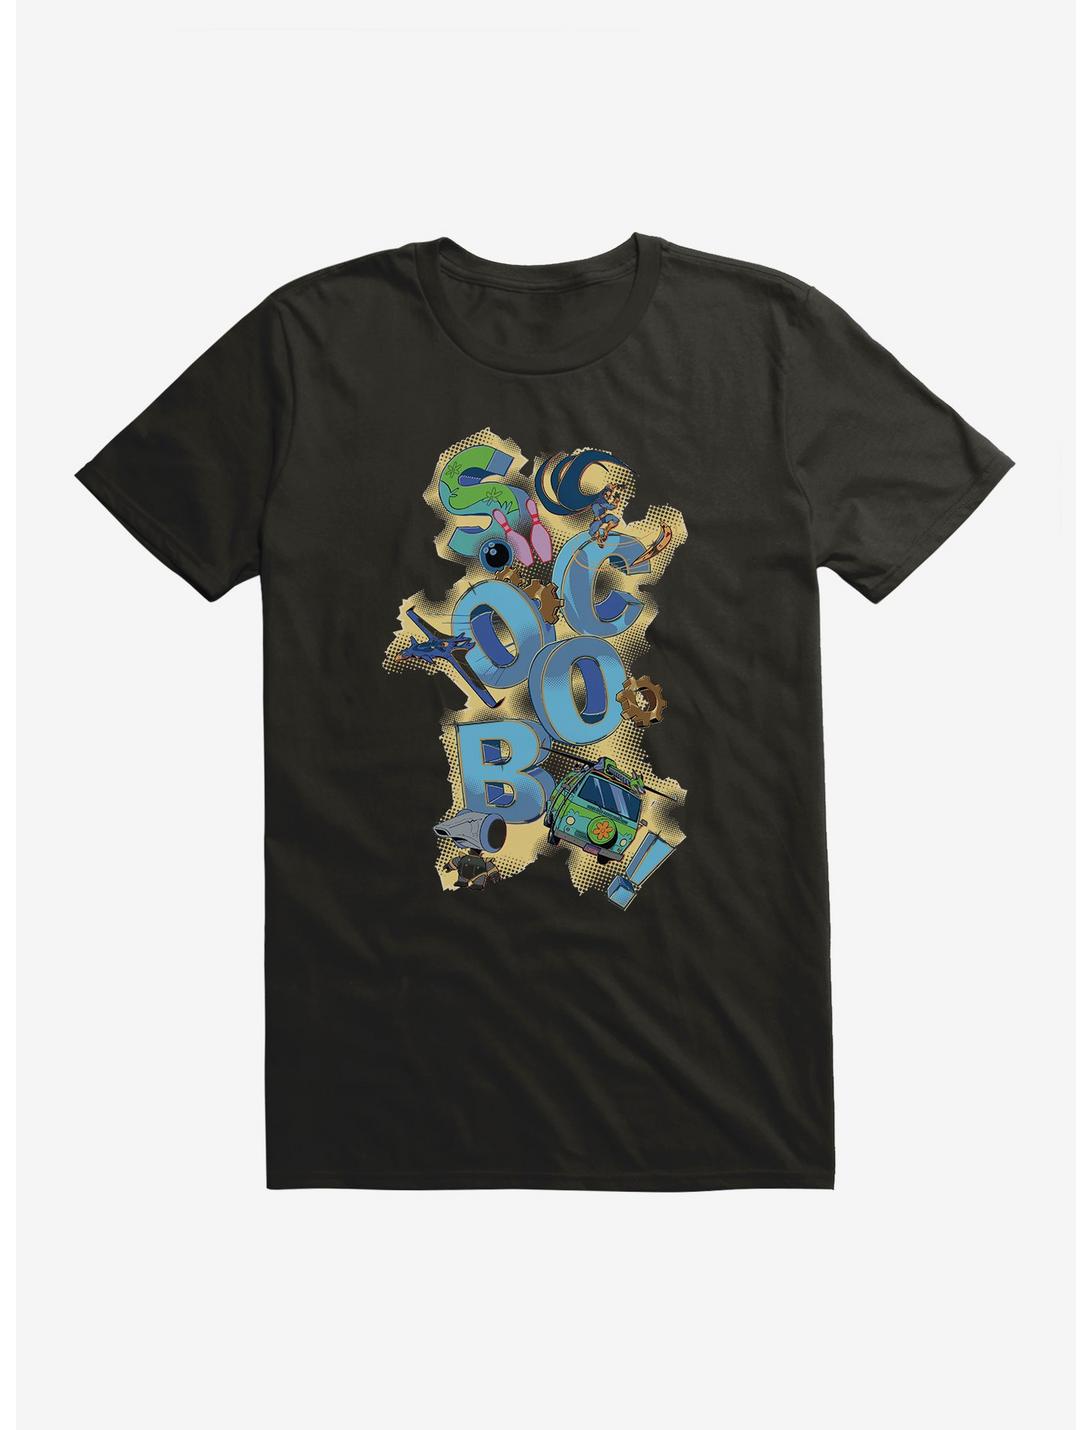 Scoob! Icons T-Shirt | BoxLunch